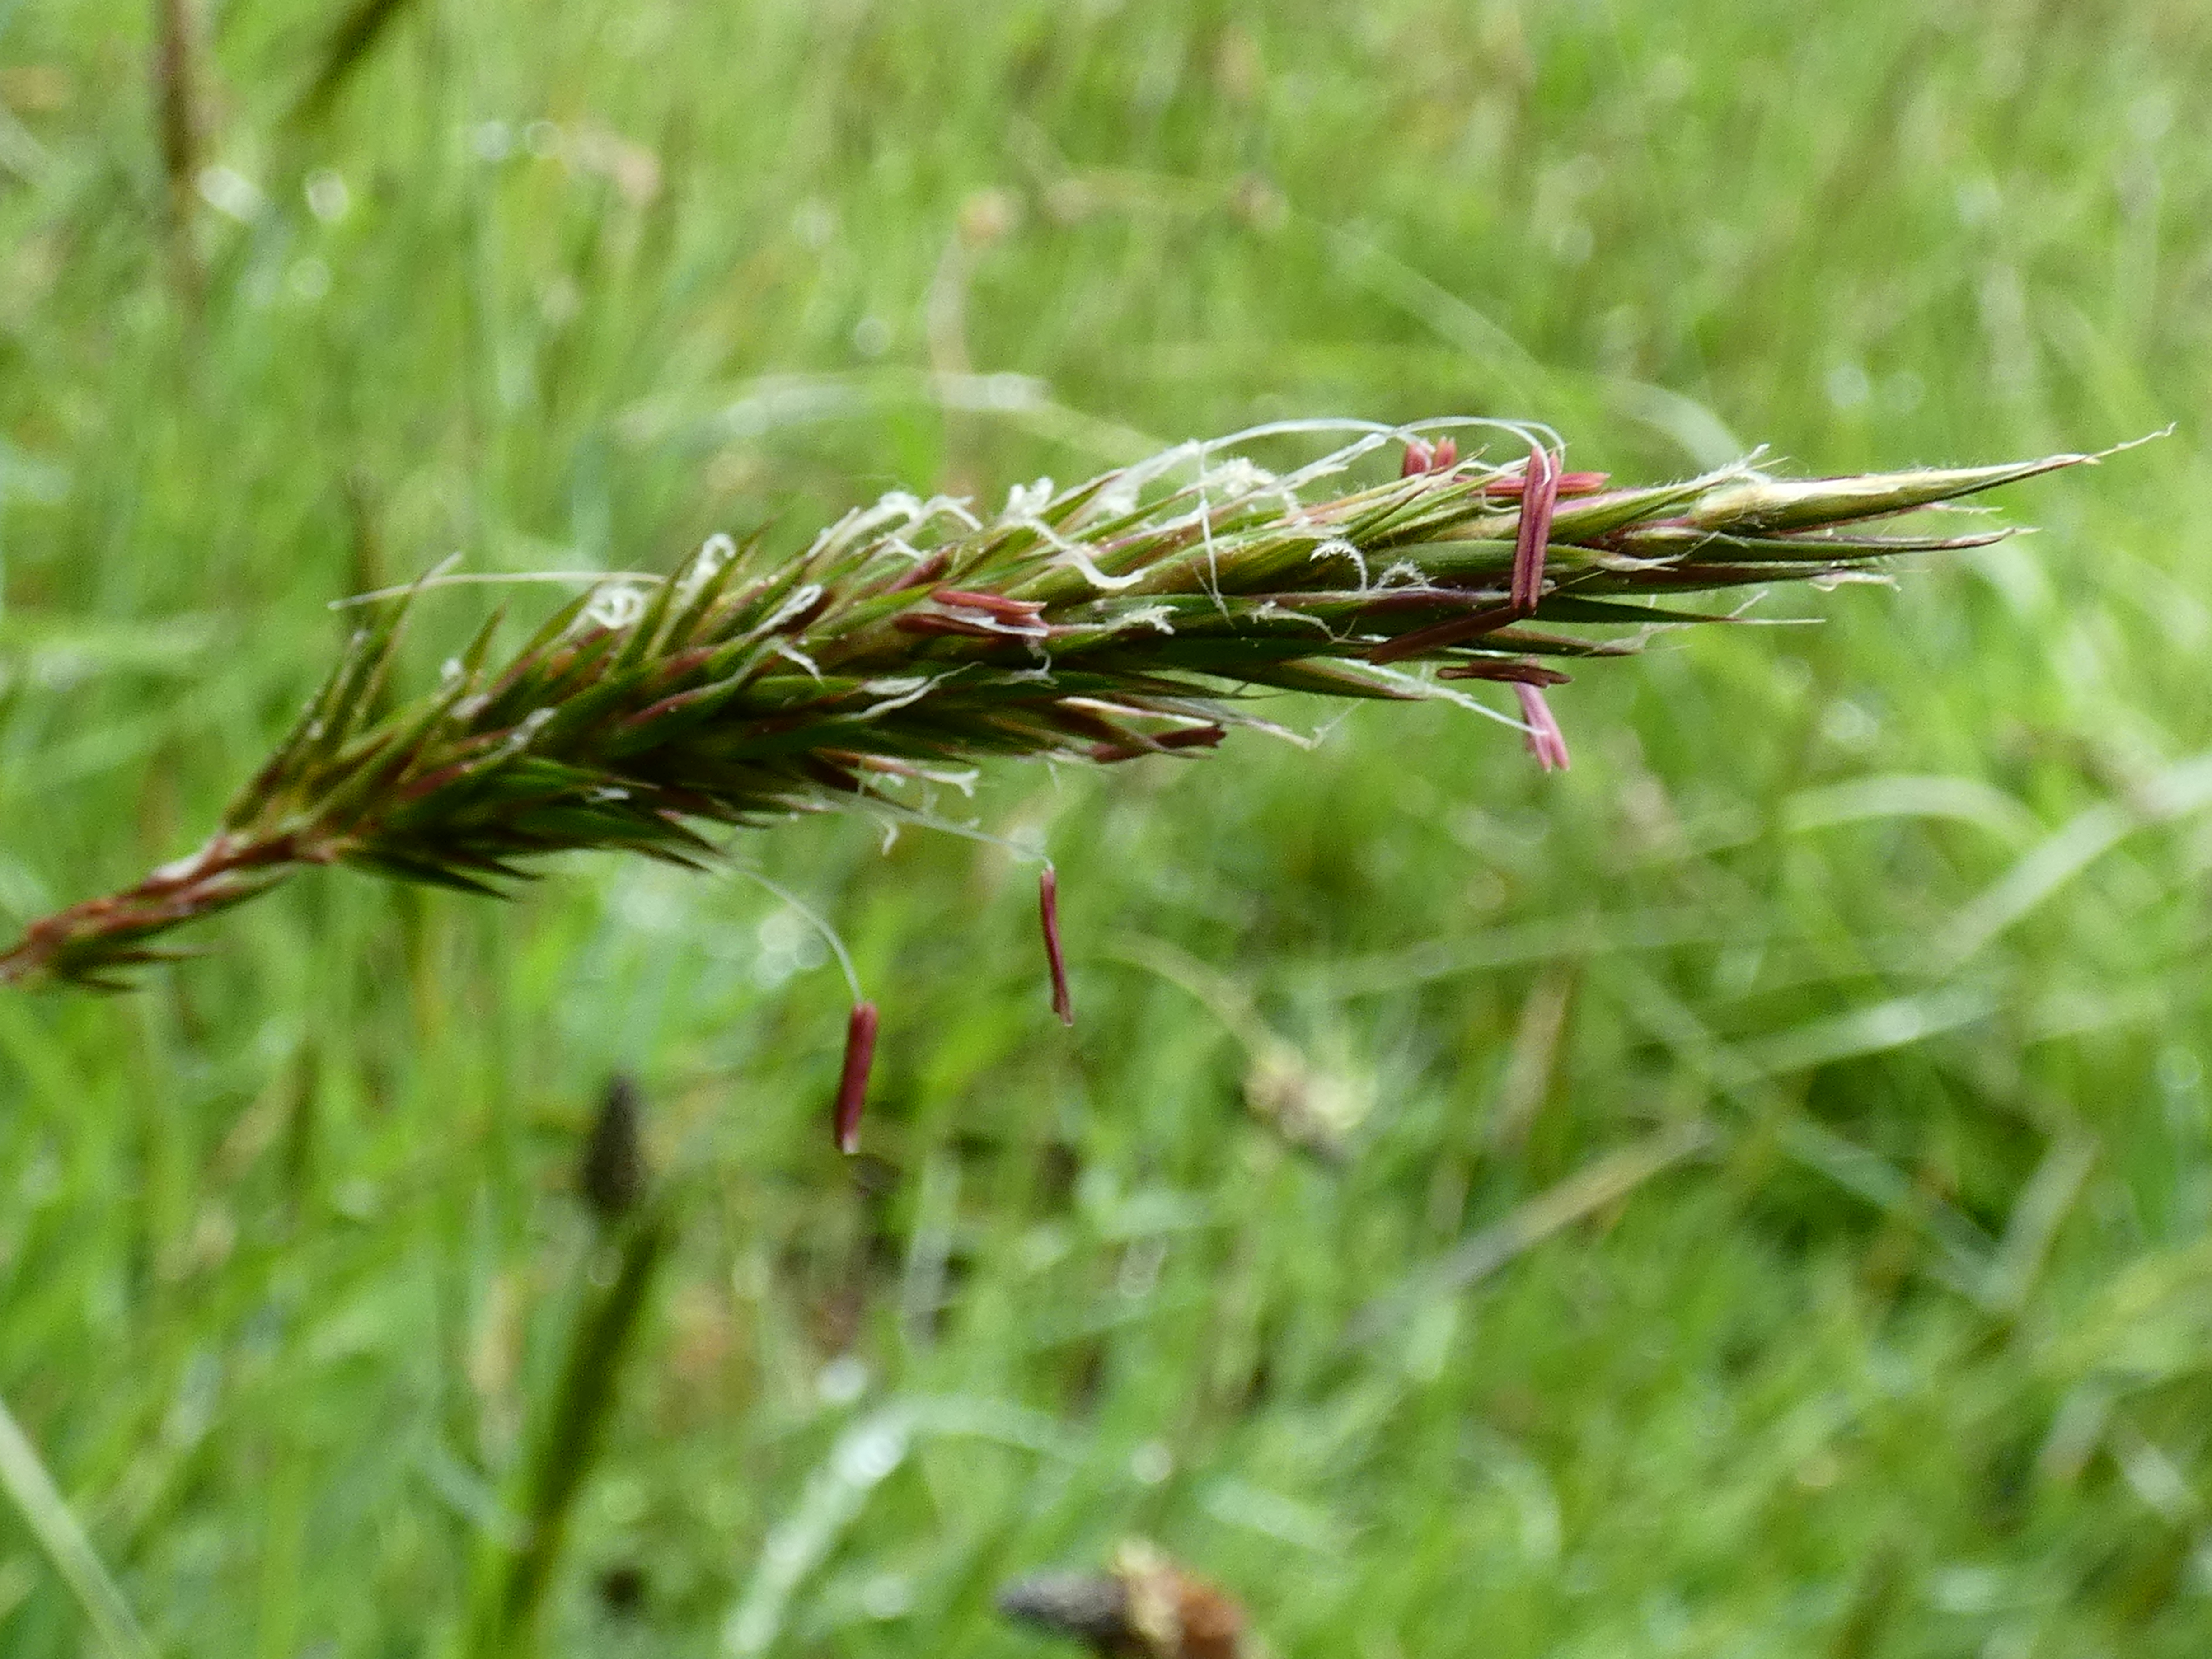 A grass inflorescence with large dangling anthers and feathery stigmas. No showy floral parts or colors are present.